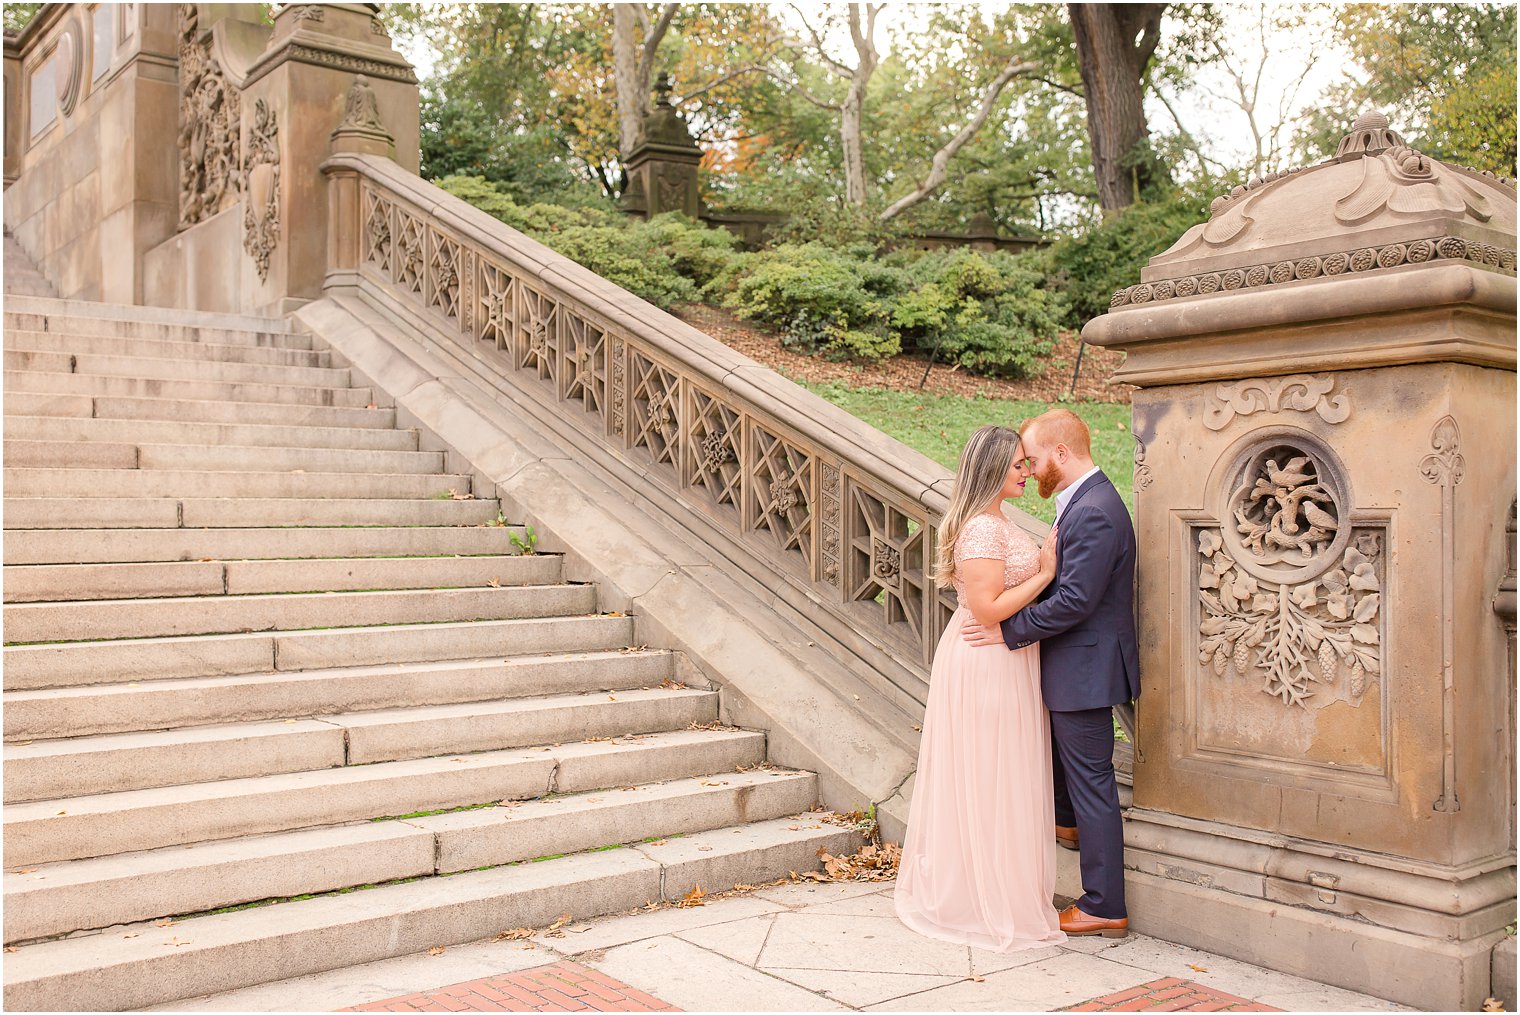 Engagement session at Bethesda Terrace in Central Park